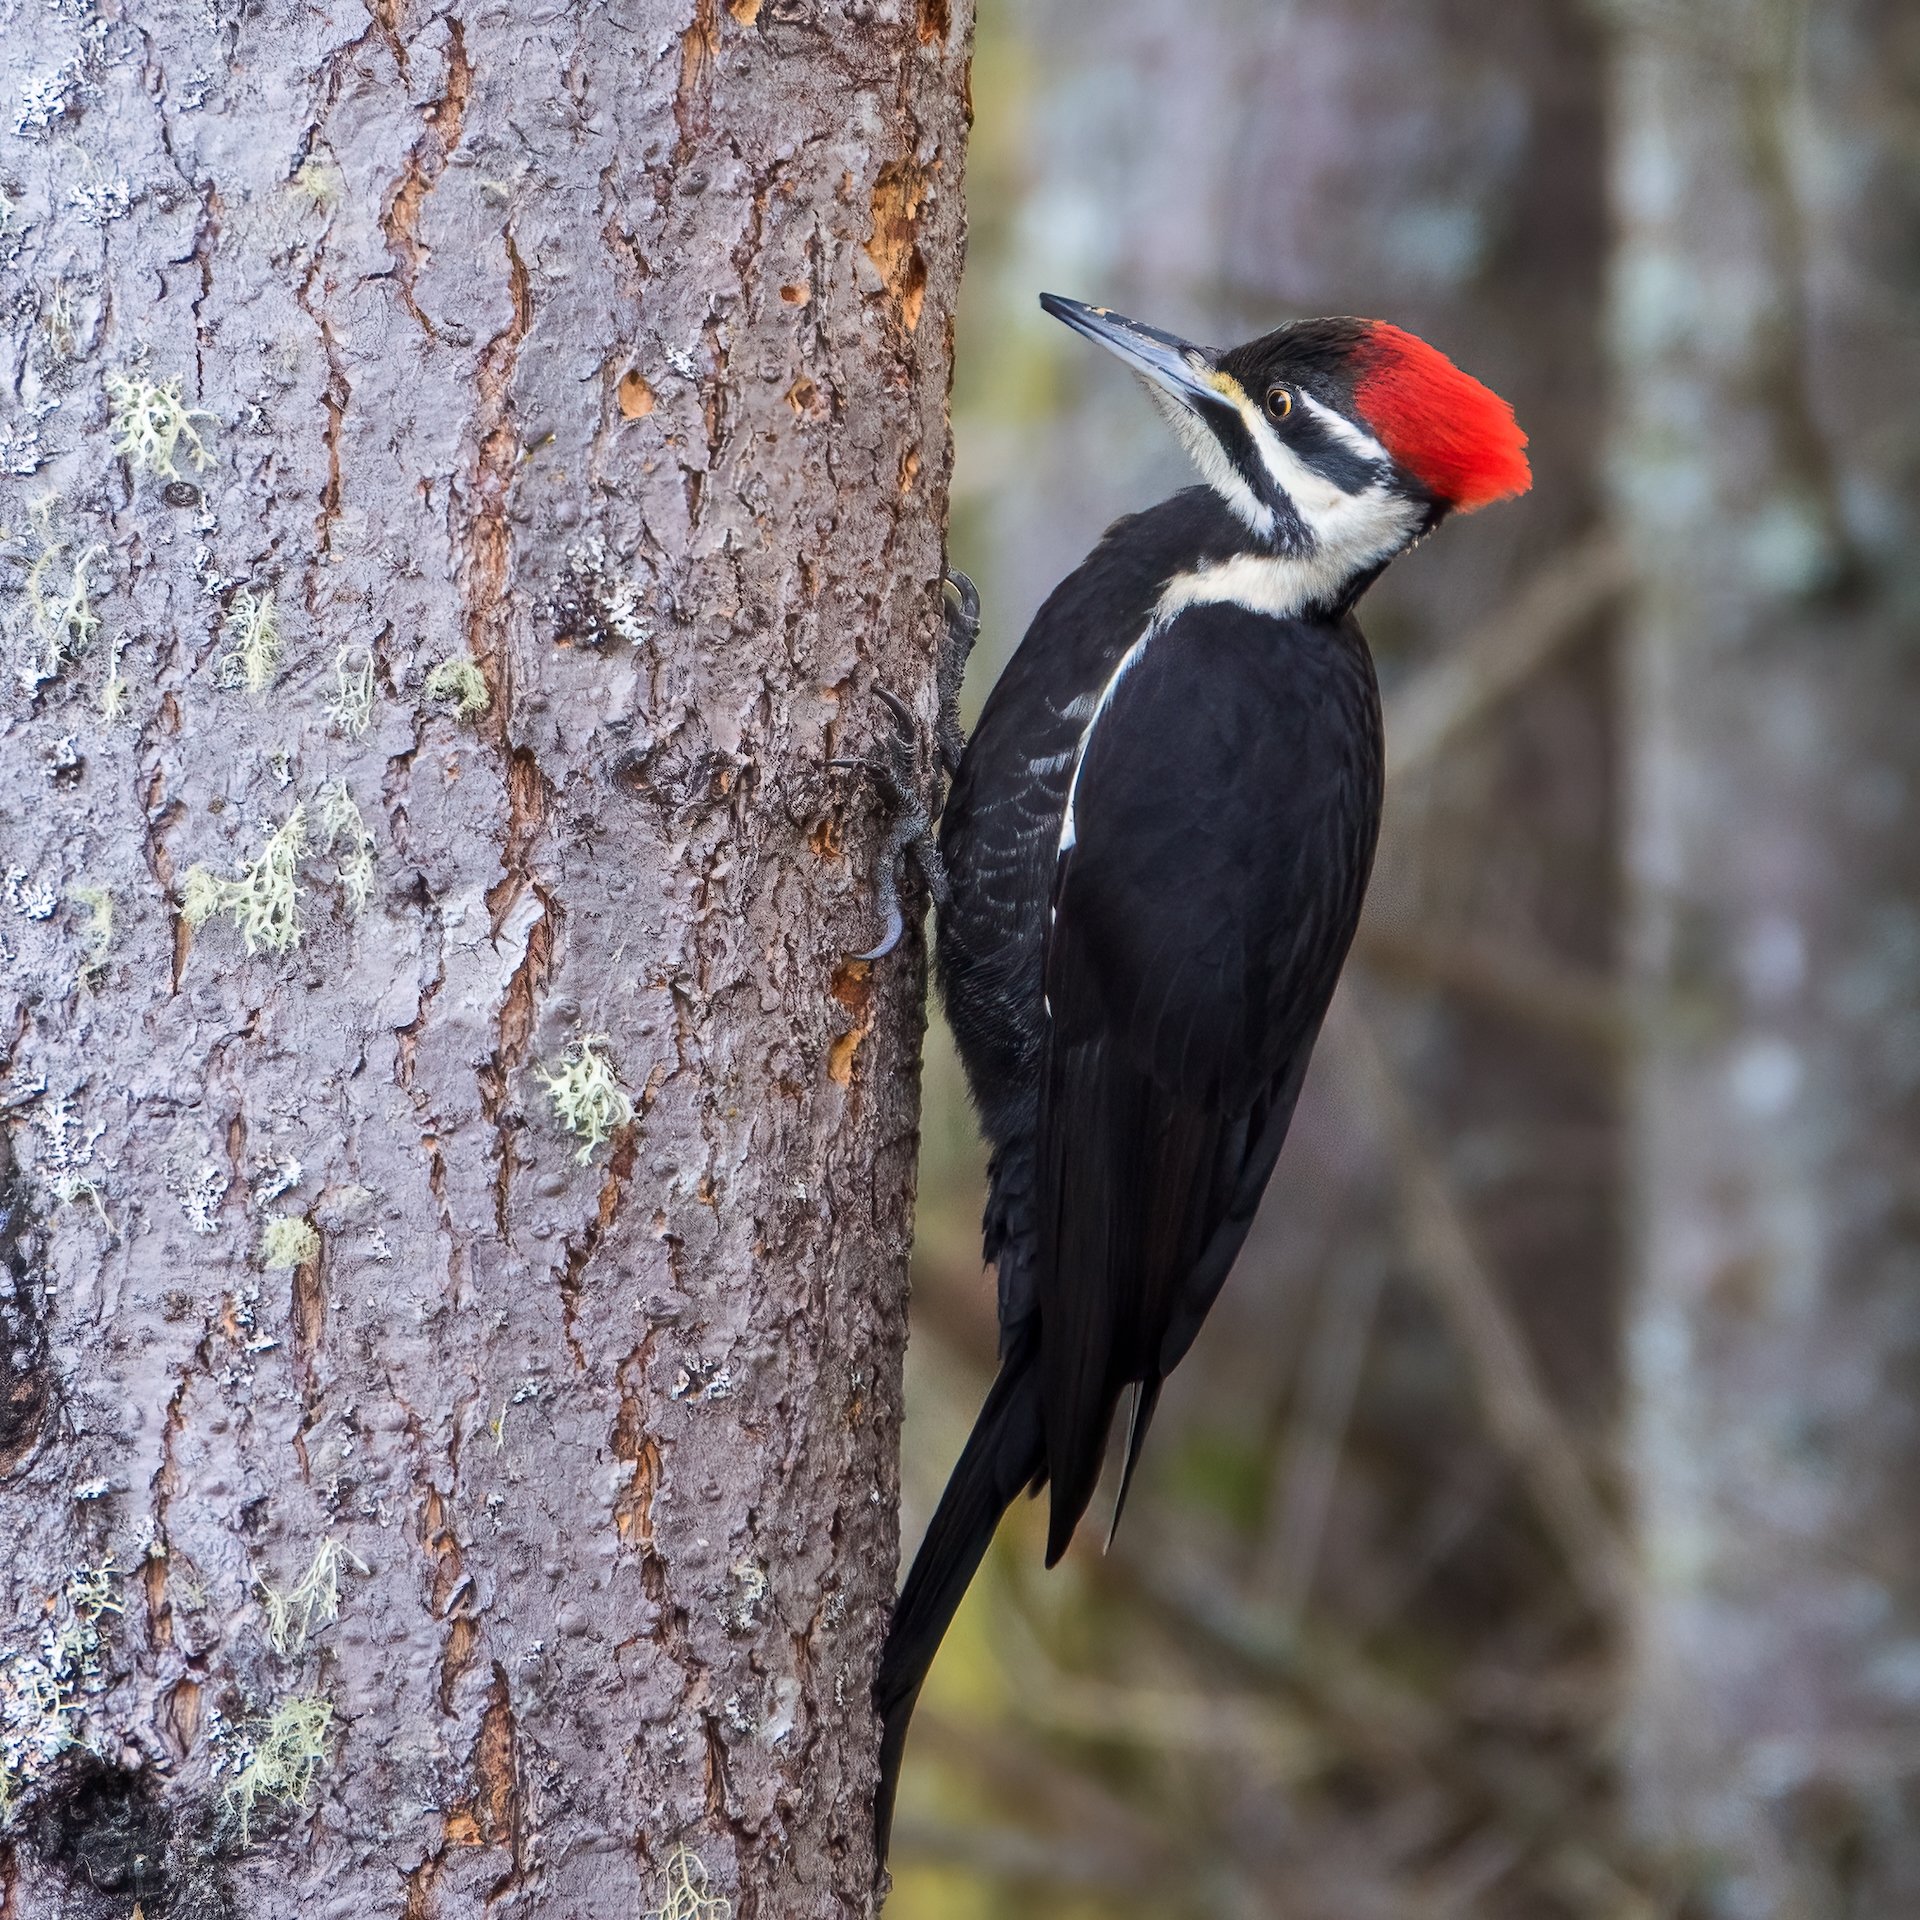  The pileated woodpecker stopped by for a visit and I got some good shots. 